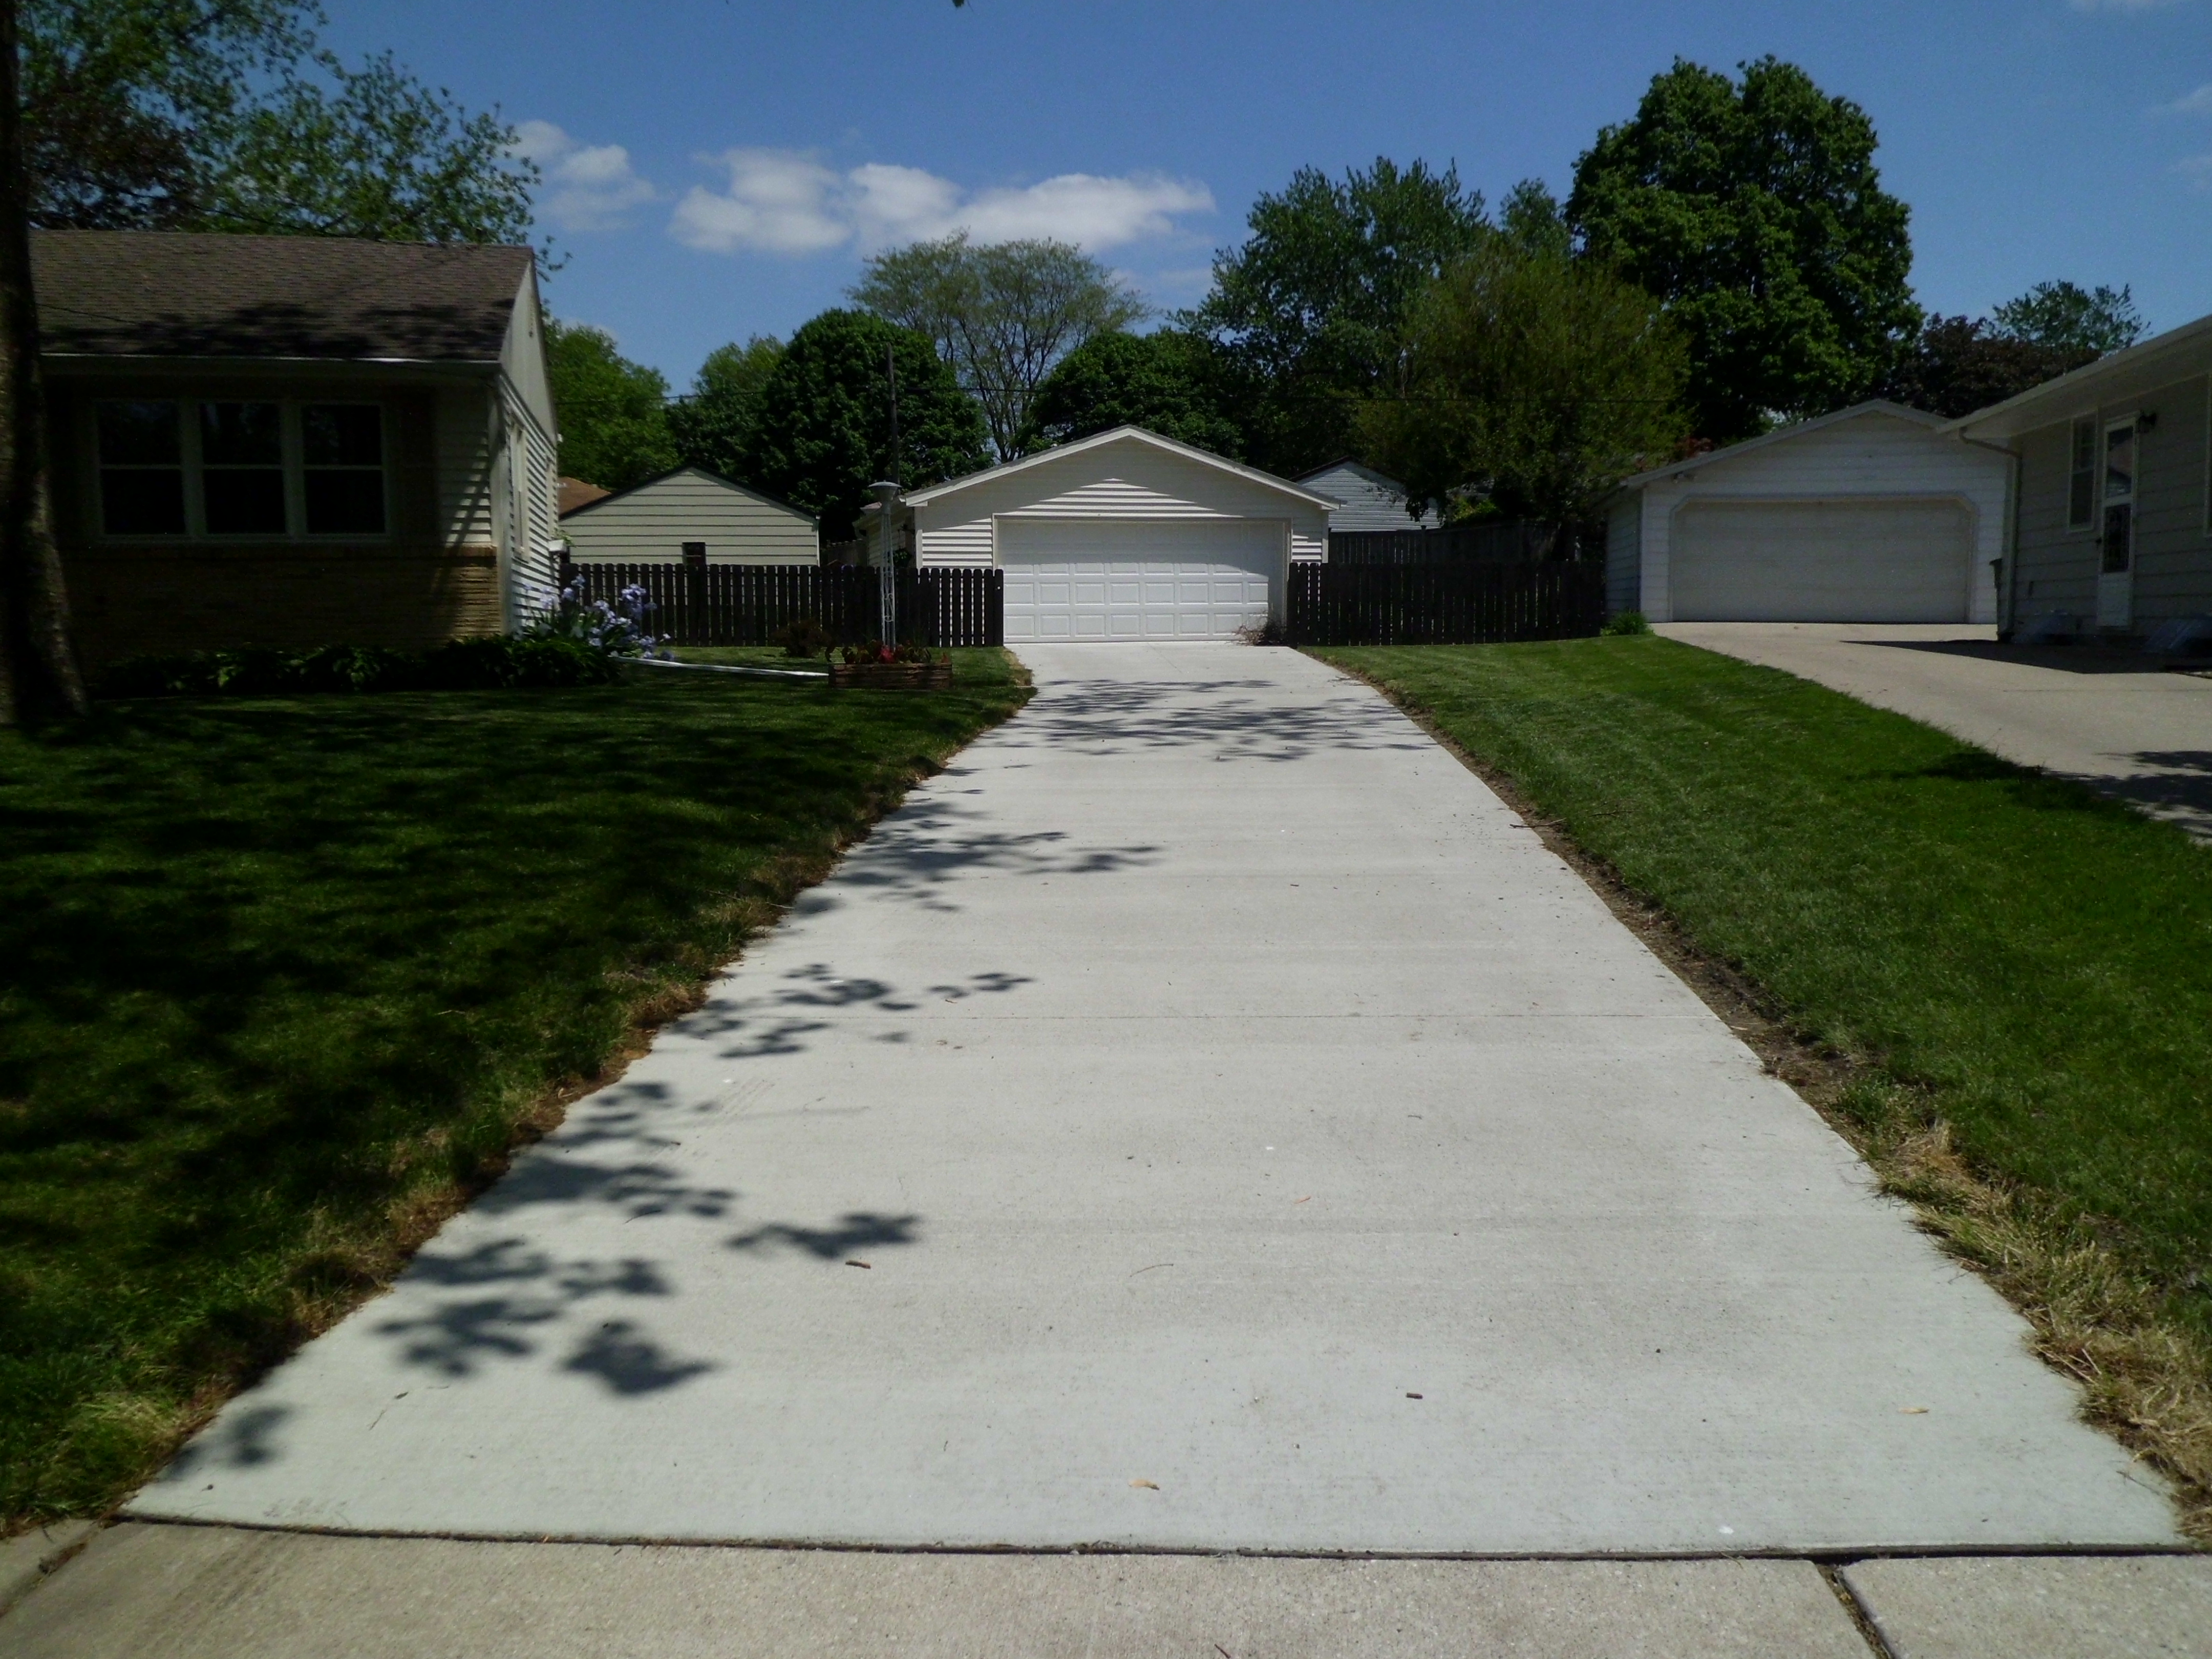 “I am very happy with my driveway! It looks great!”